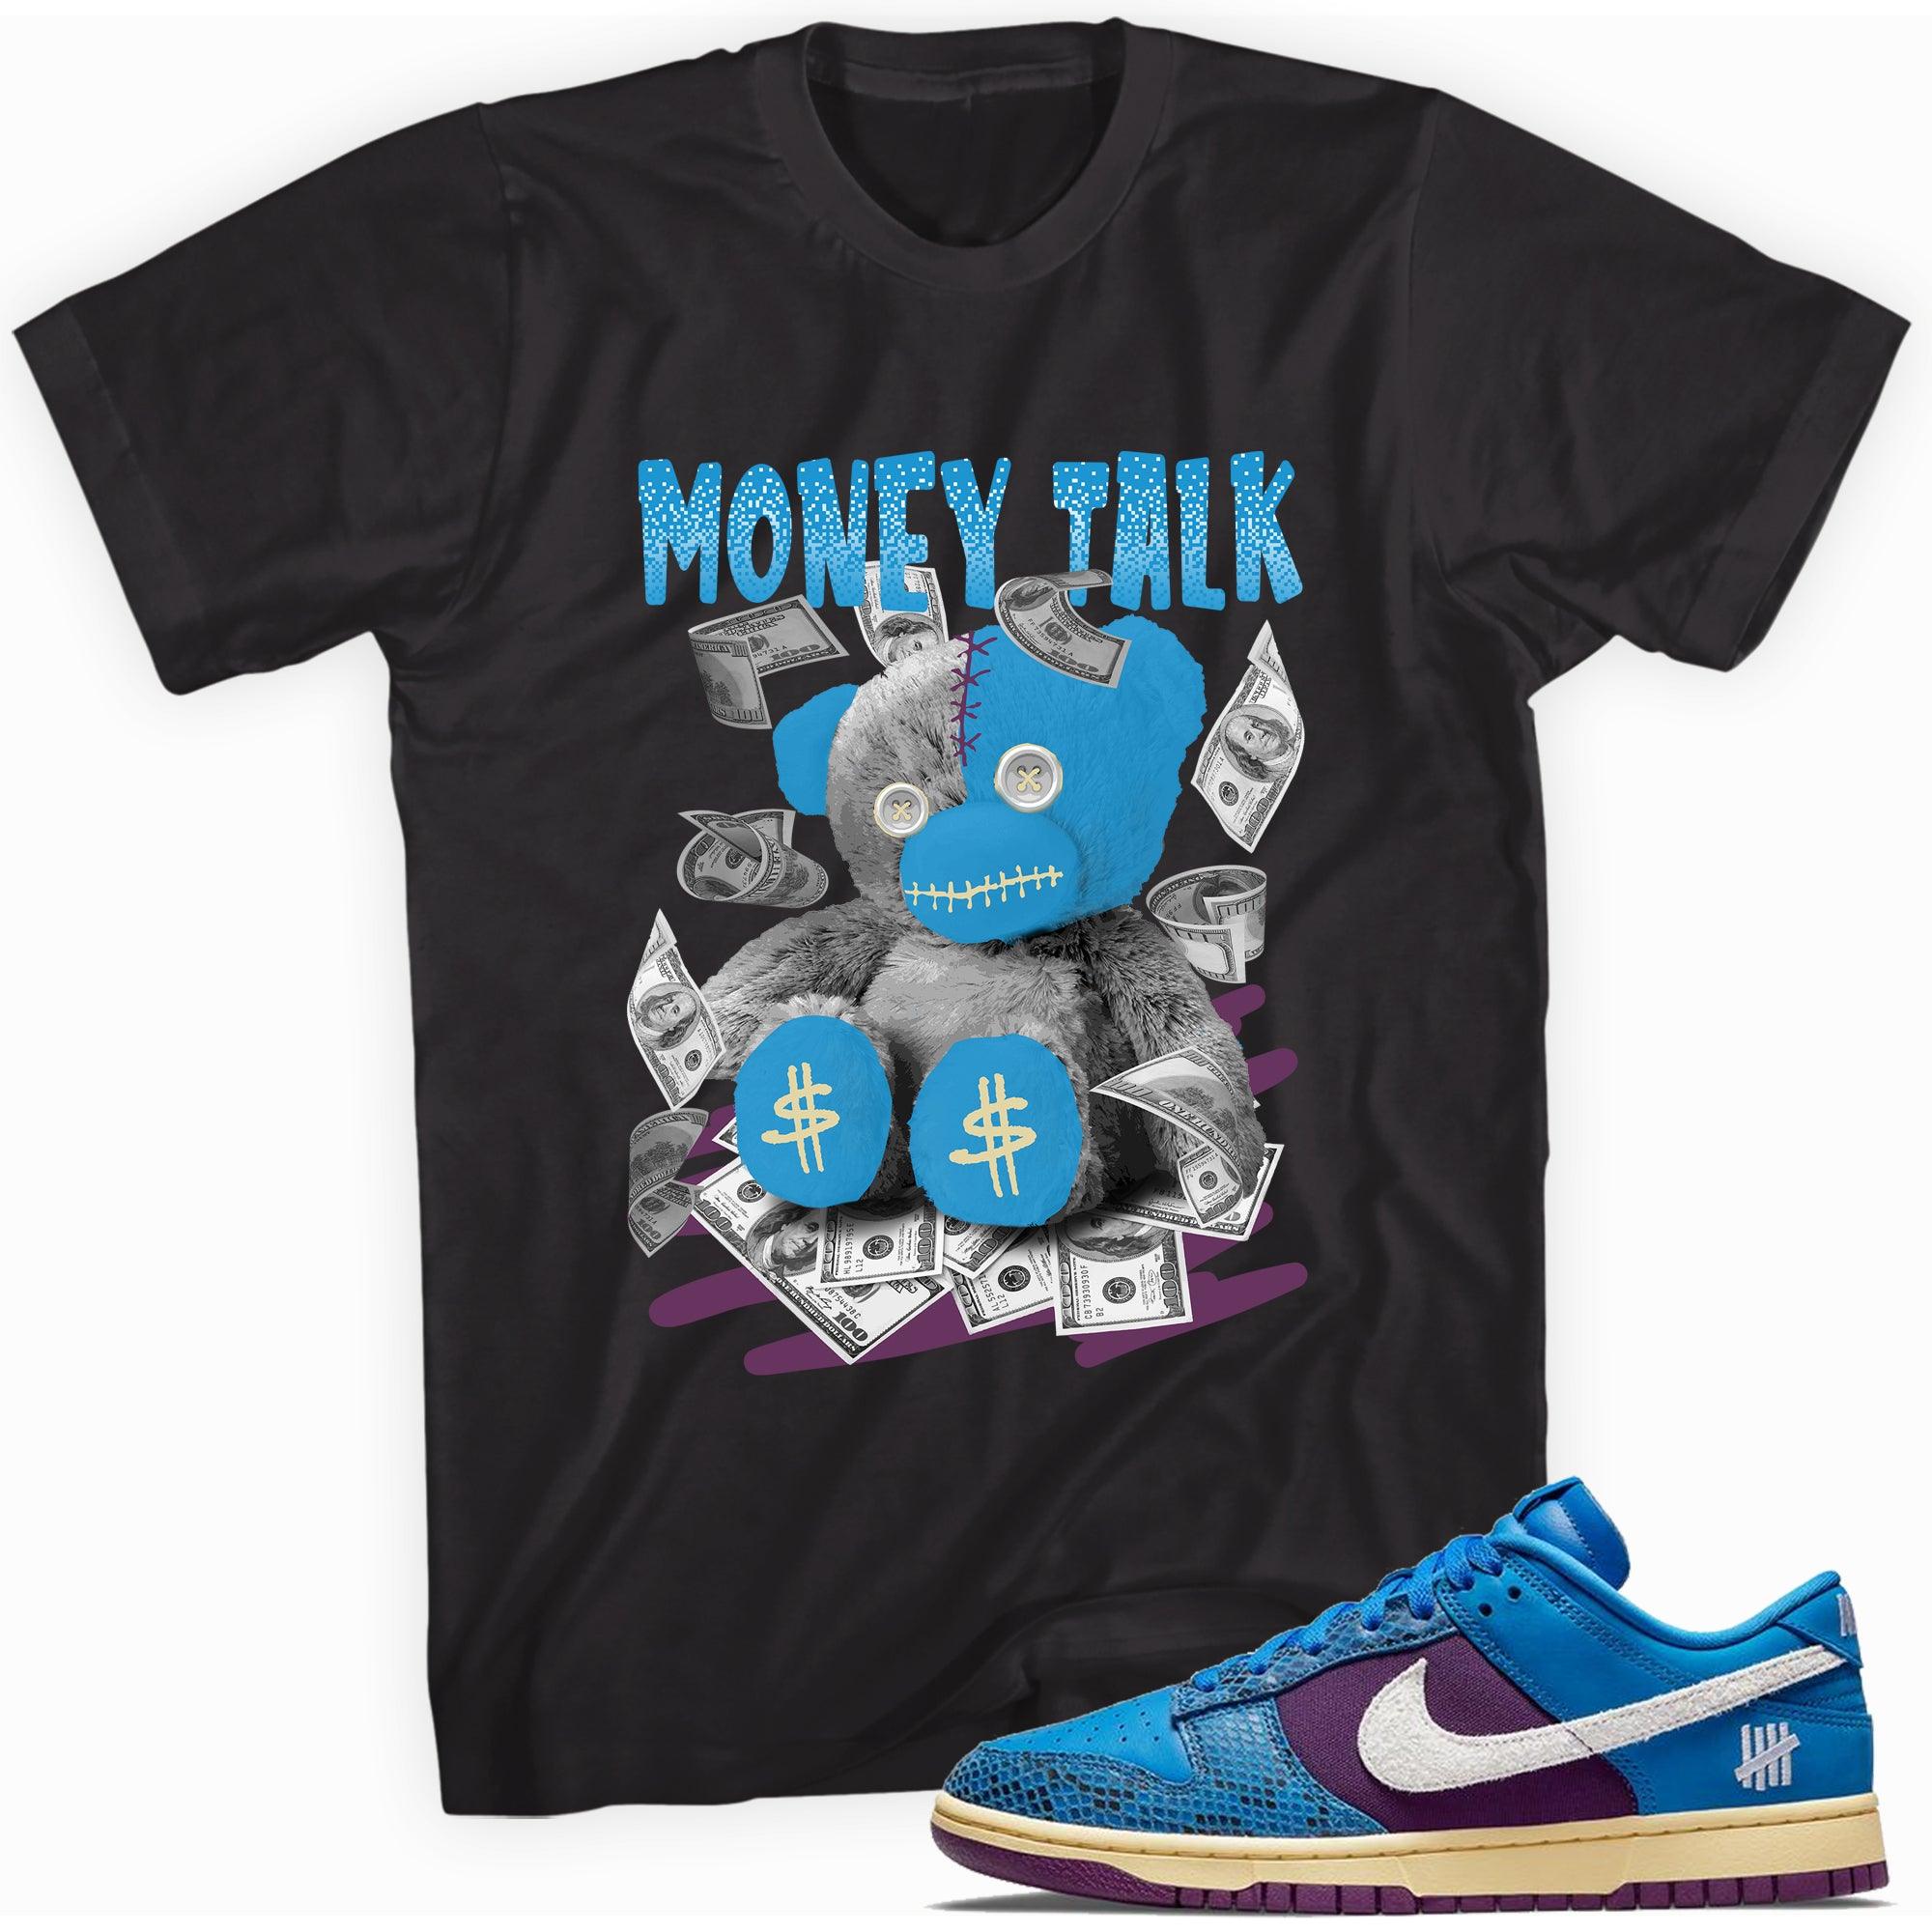 Money Talk Shirt Nike Dunk Low Undefeated 5 On It Dunk vs AF1 Sneakers photo